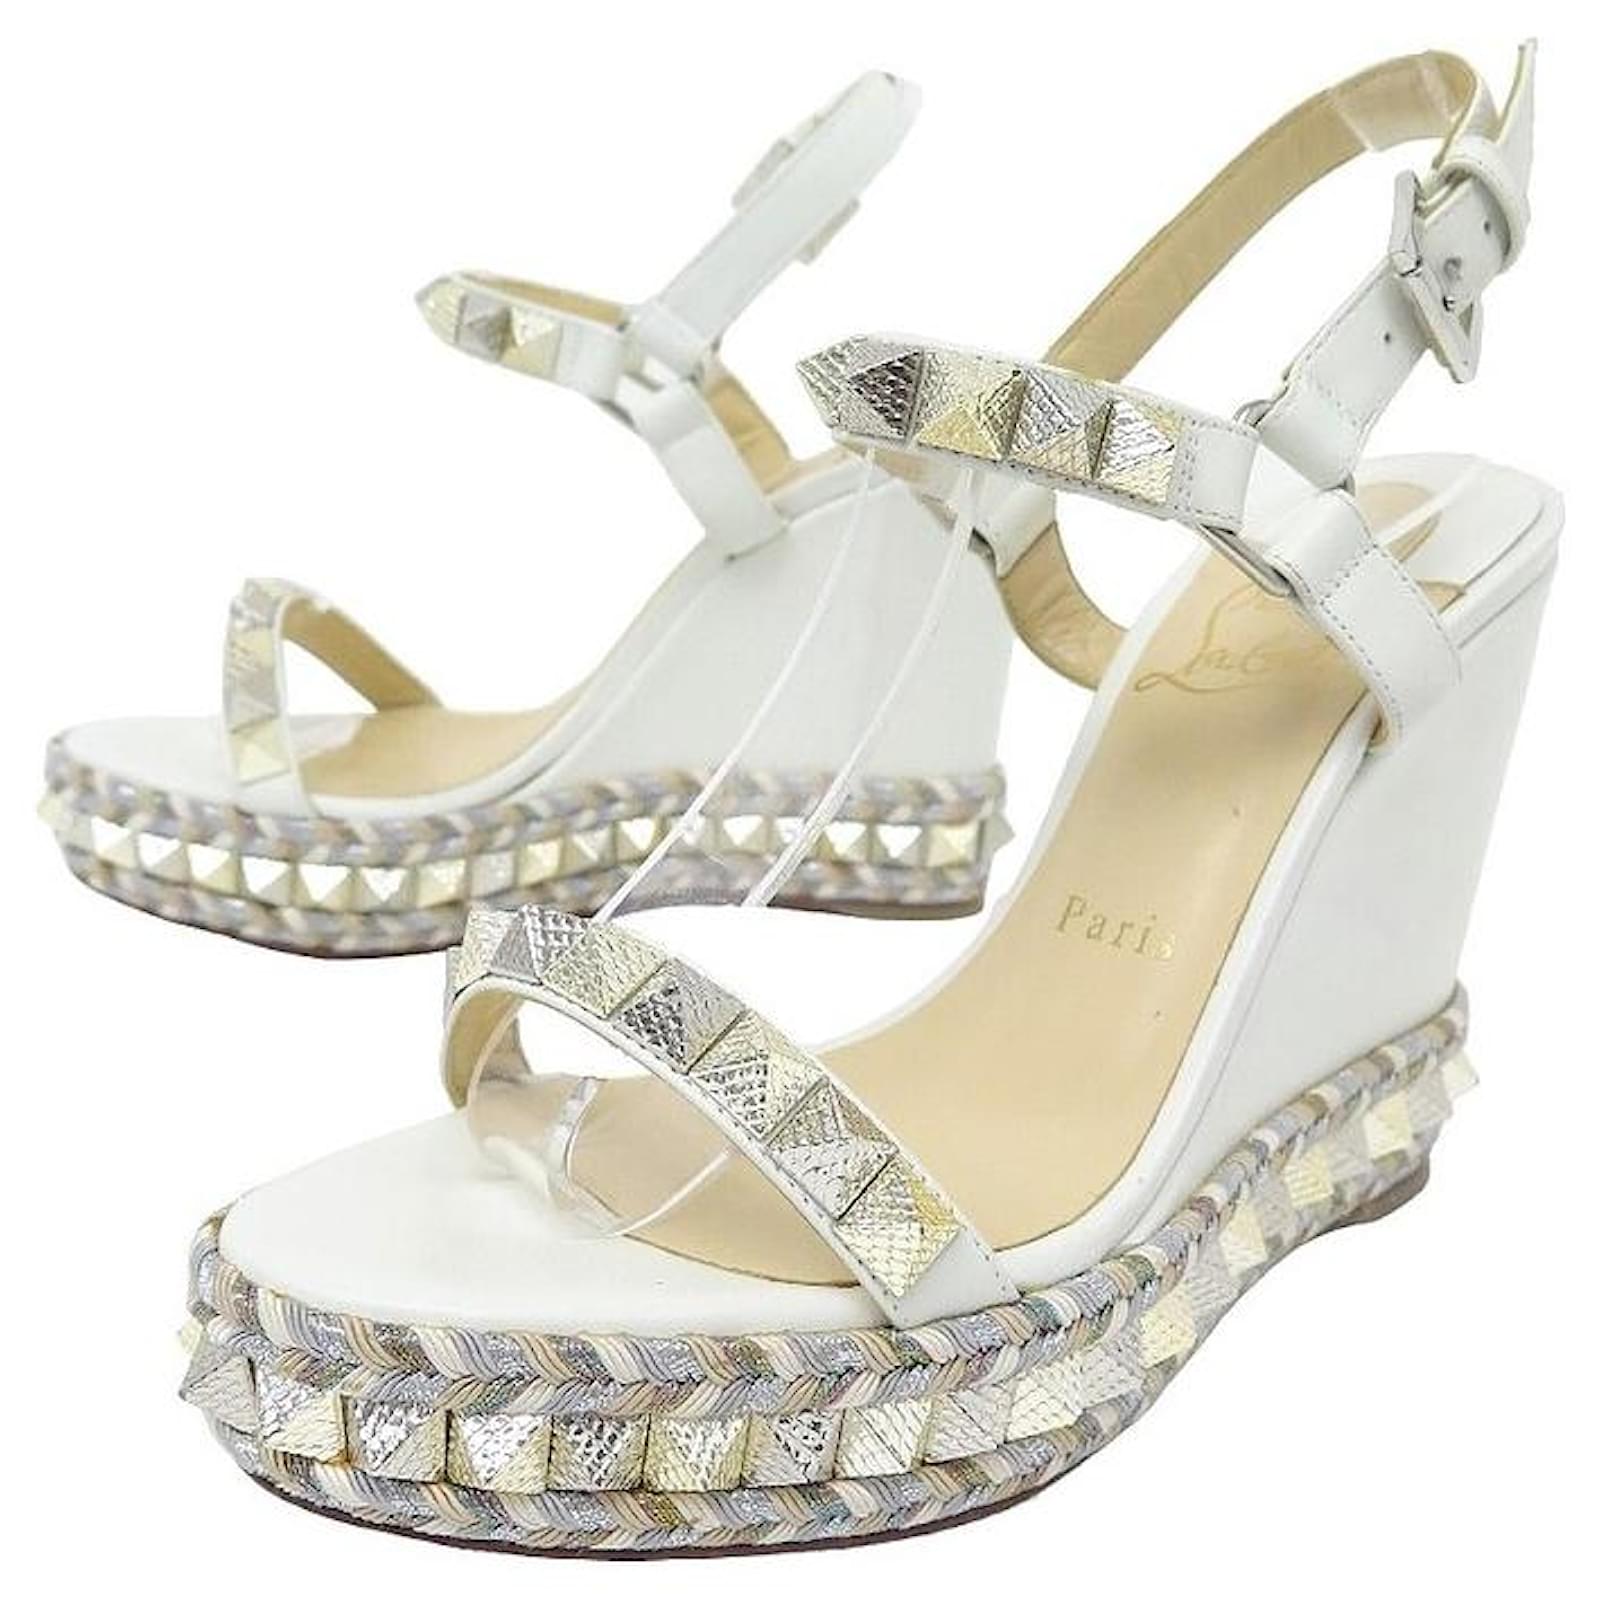 CHRISTIAN LOUBOUTIN PYRACLOU SHOES 38 WHITE LEATHER WEDGE SANDALS